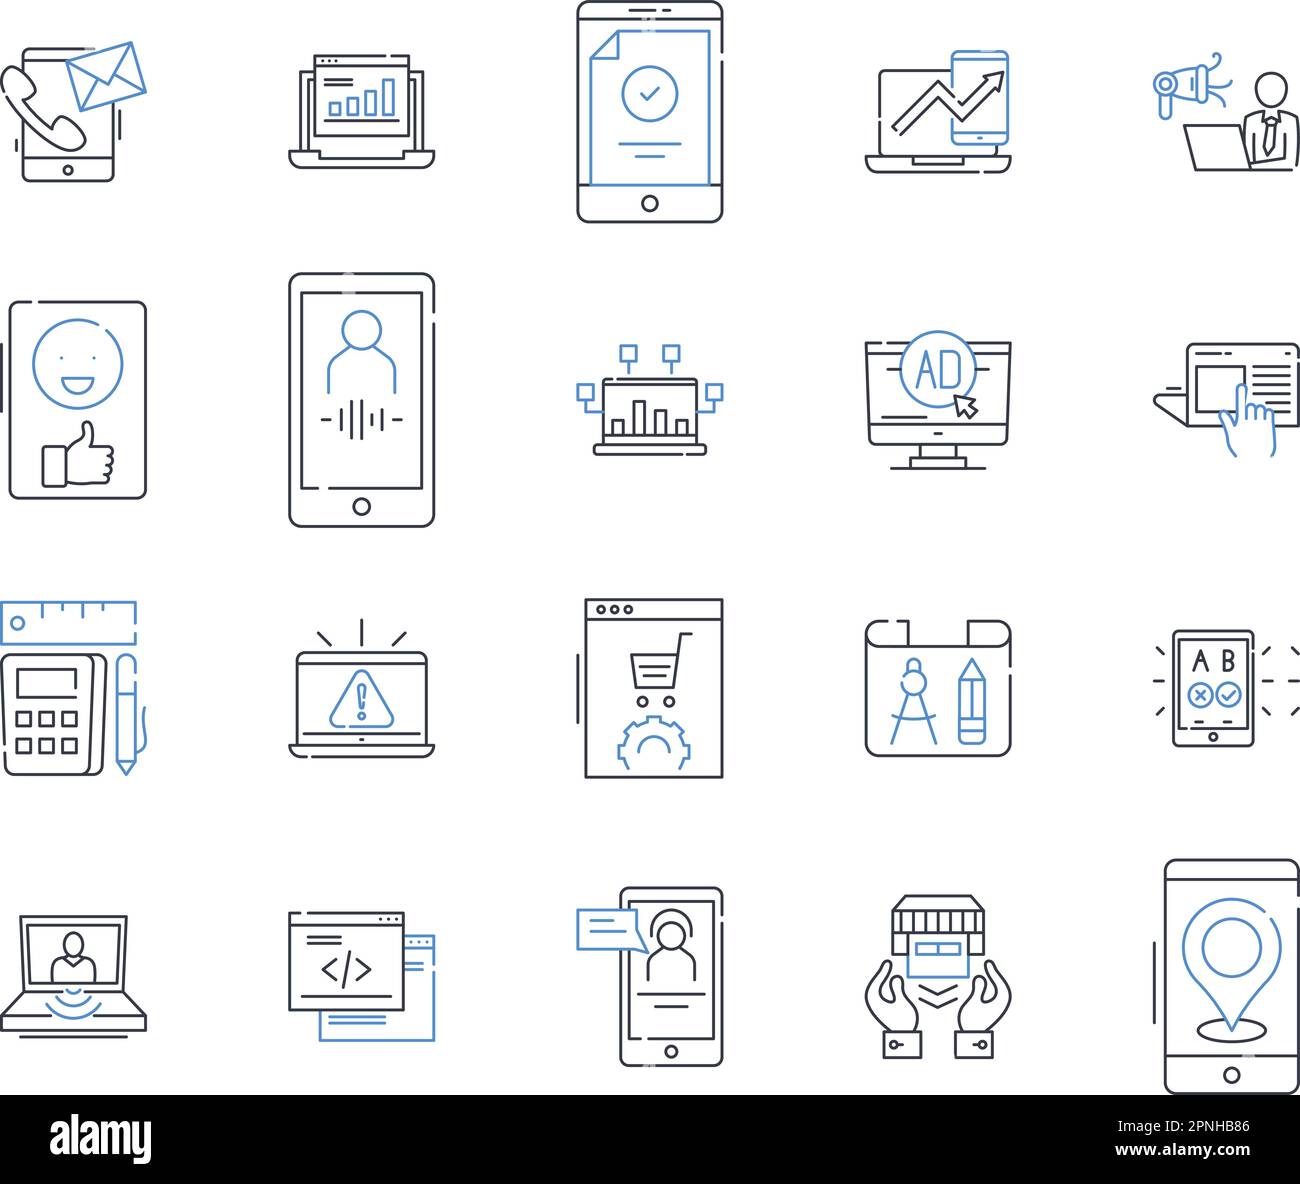 Computer Vision line icons collection. Recognition, Detection, Analysis, Classification, Segmentation, Tracking, Extraction vector and linear Stock Vector